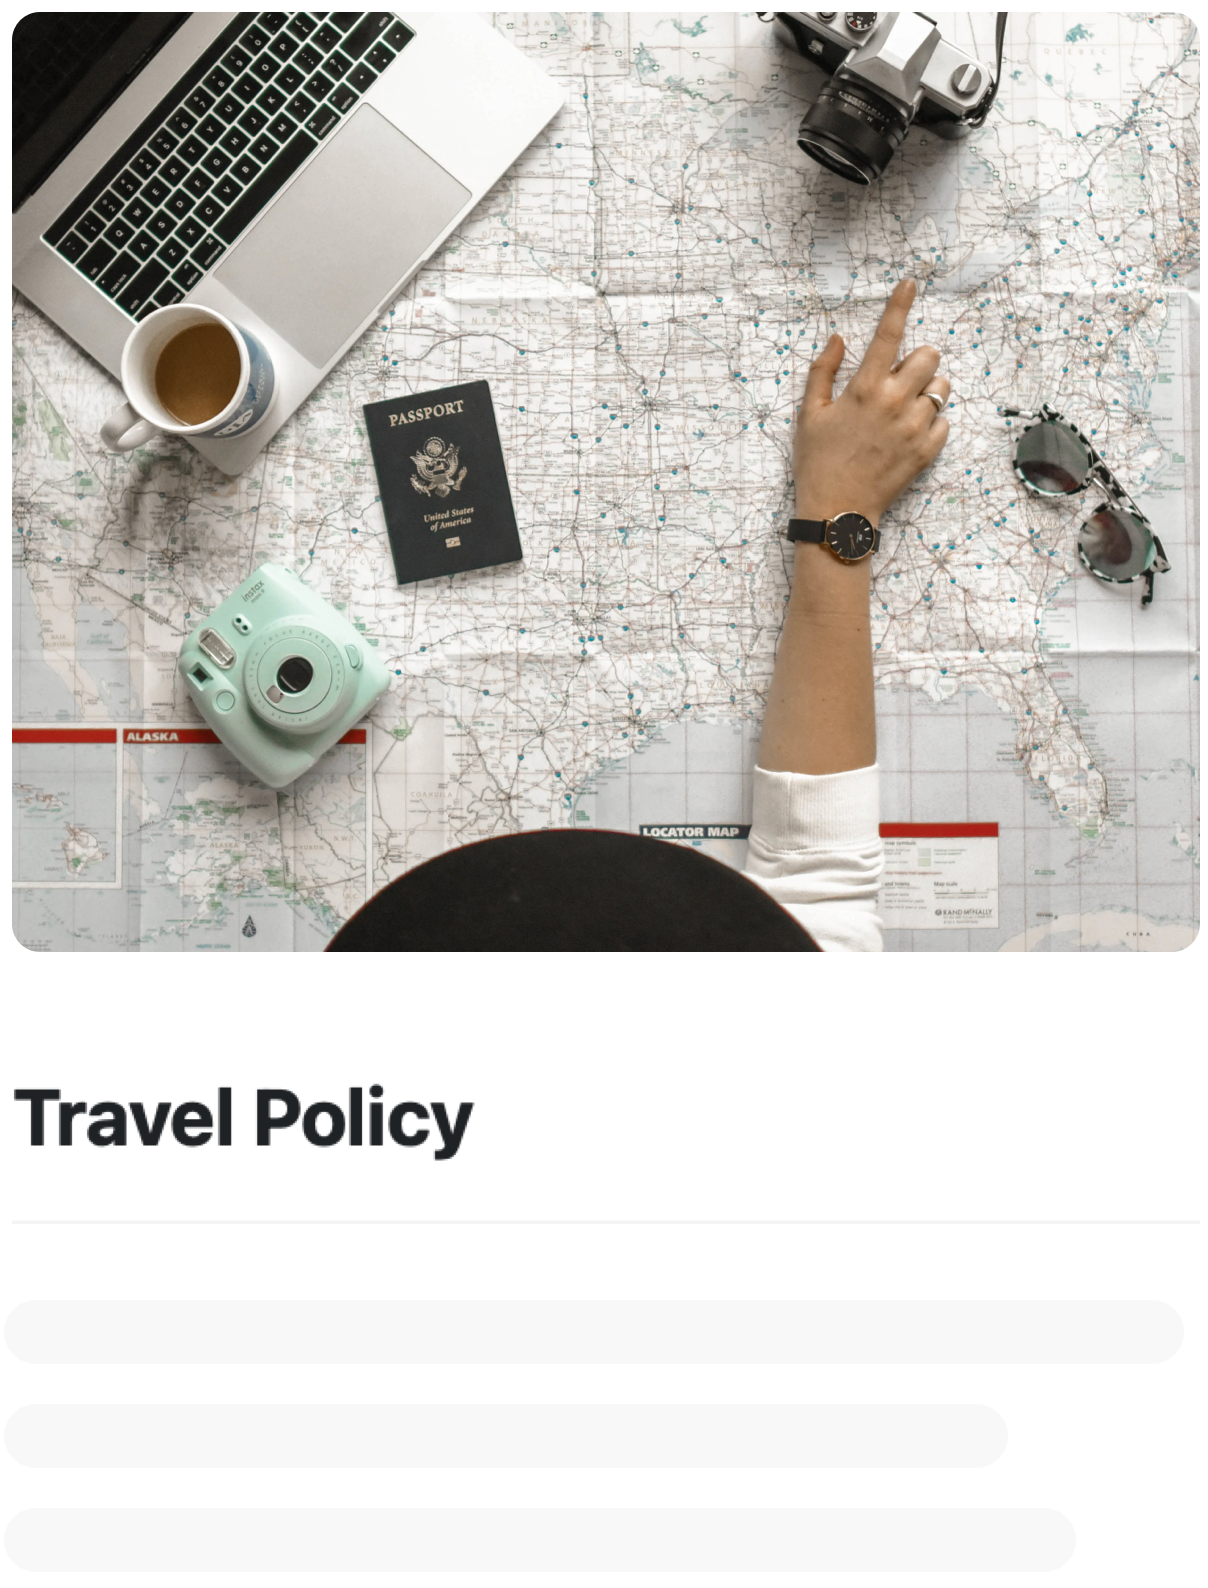 Knowledge base page for the company travel policy in Craft